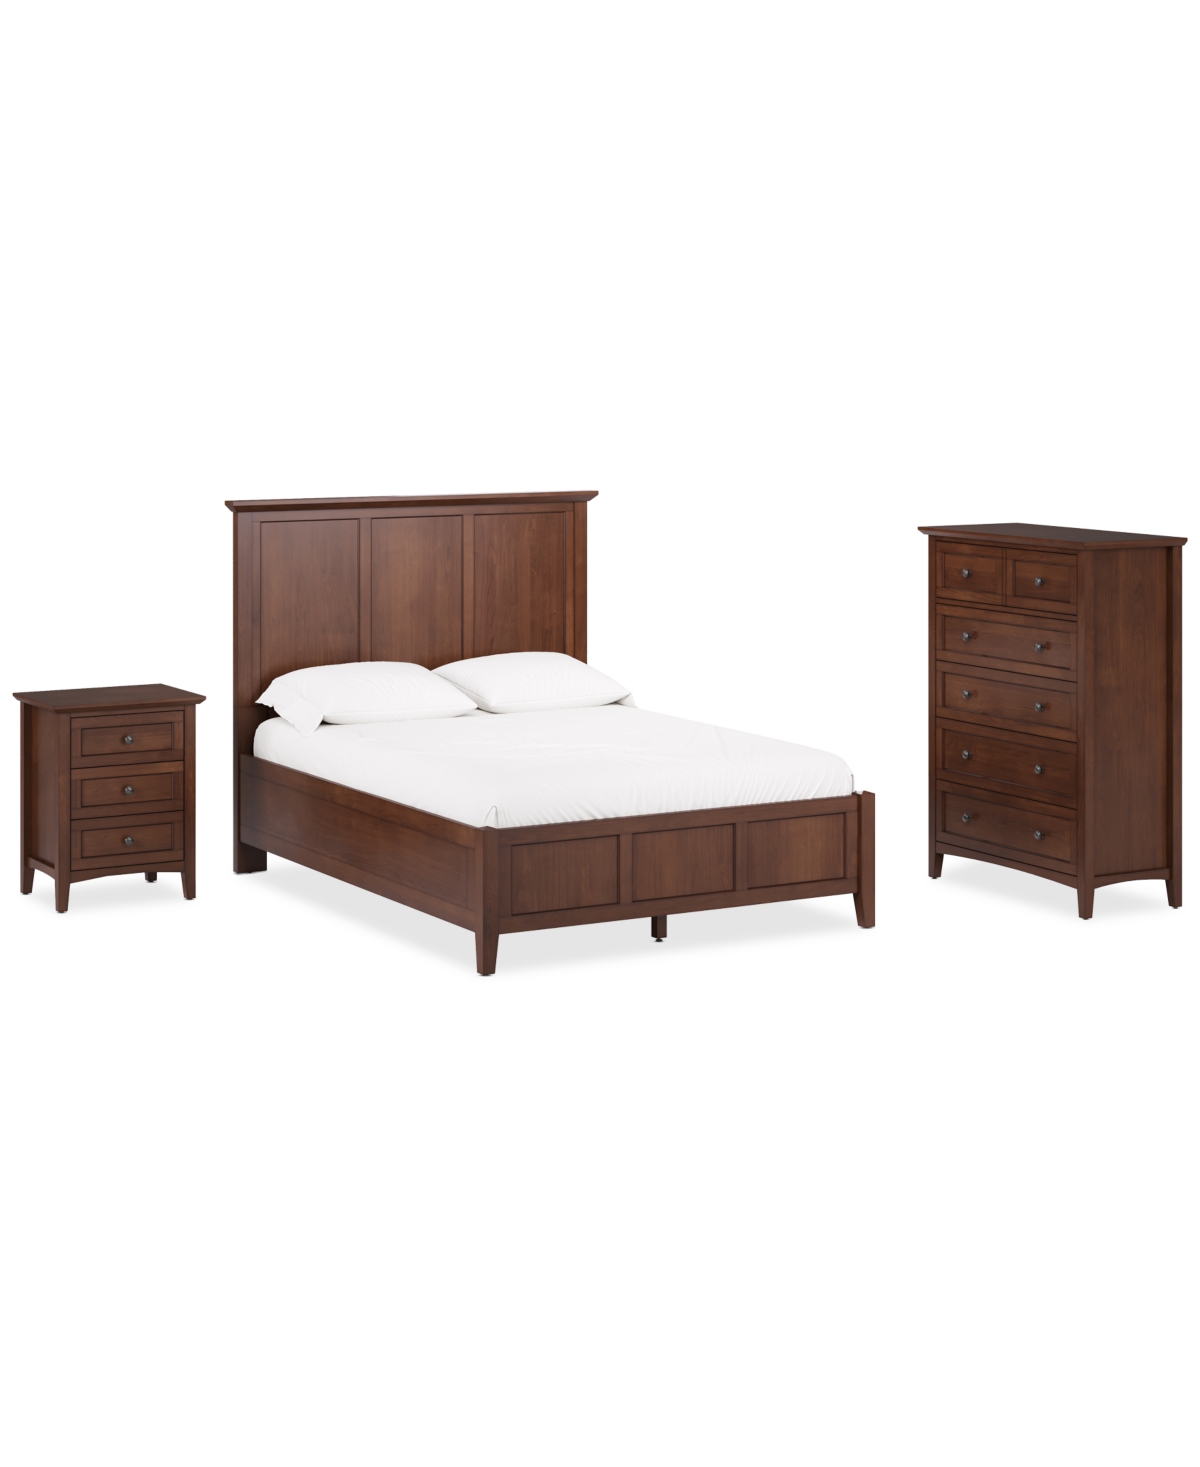 Furniture Hedworth Queen Bed 3pc (queen Bed + Chest + Nightstand) In Brown